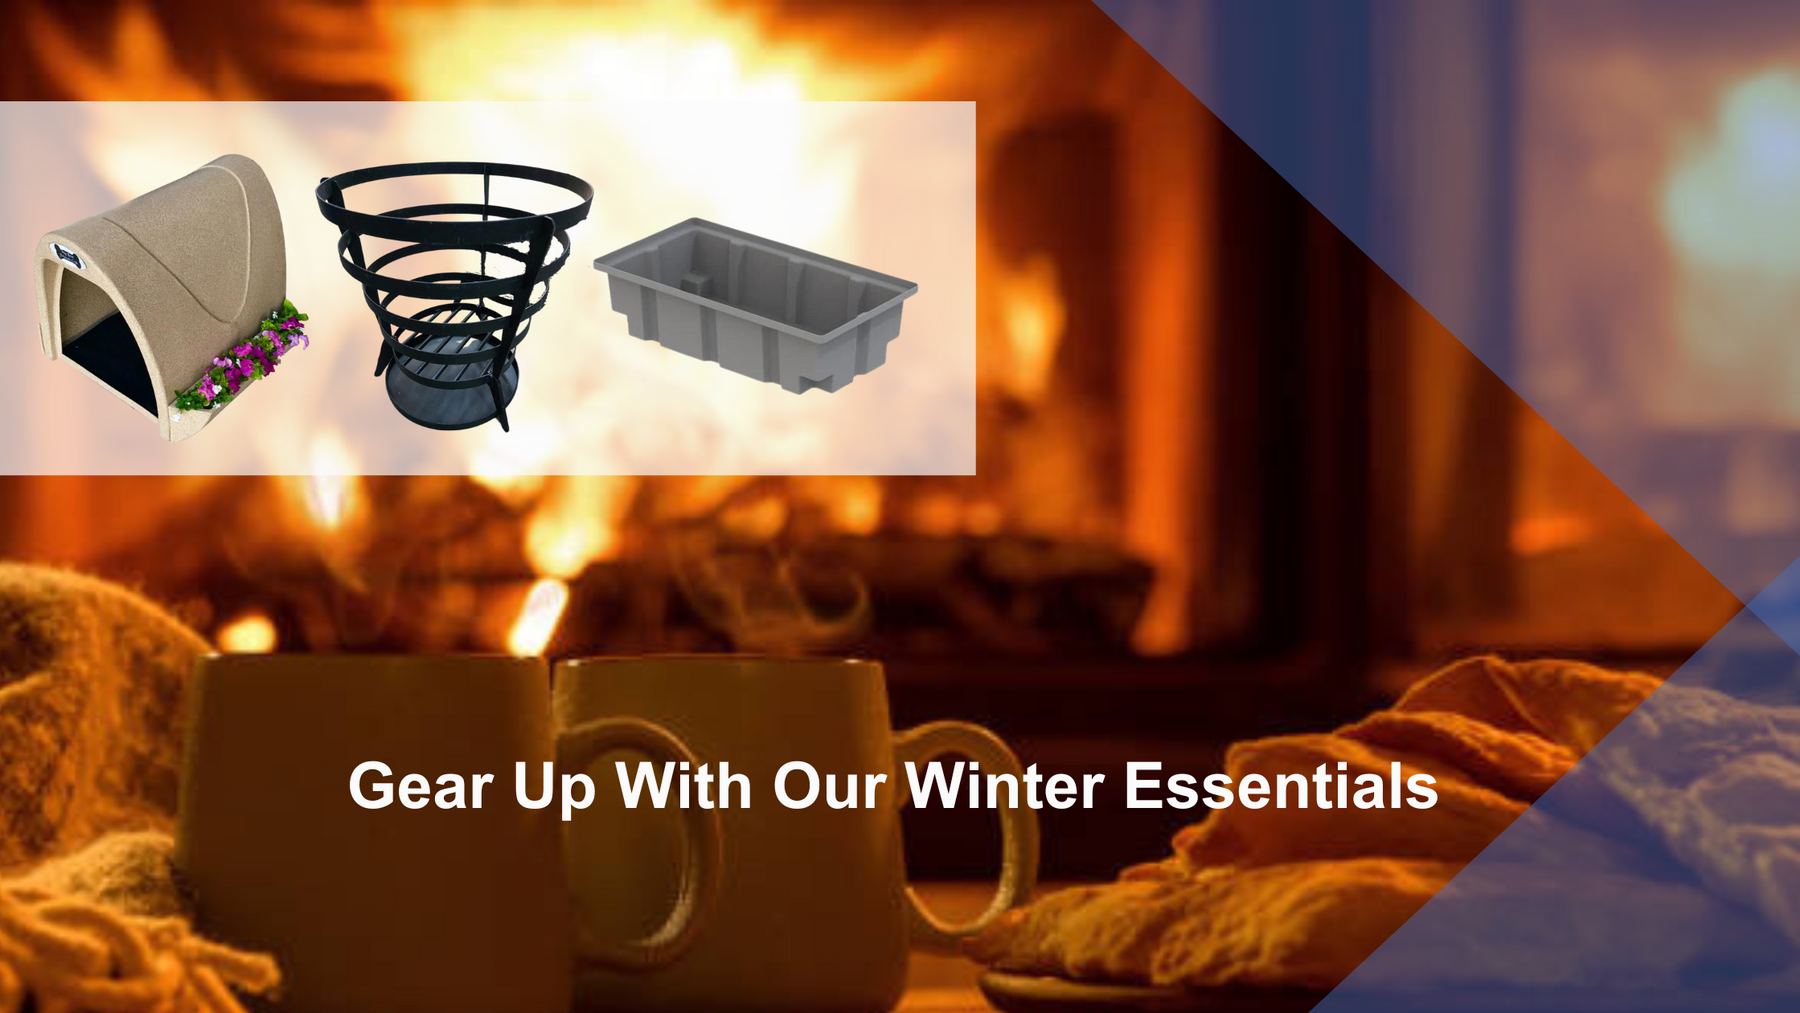 Top-Three Winter Must-Have Pioneer Plastics Products